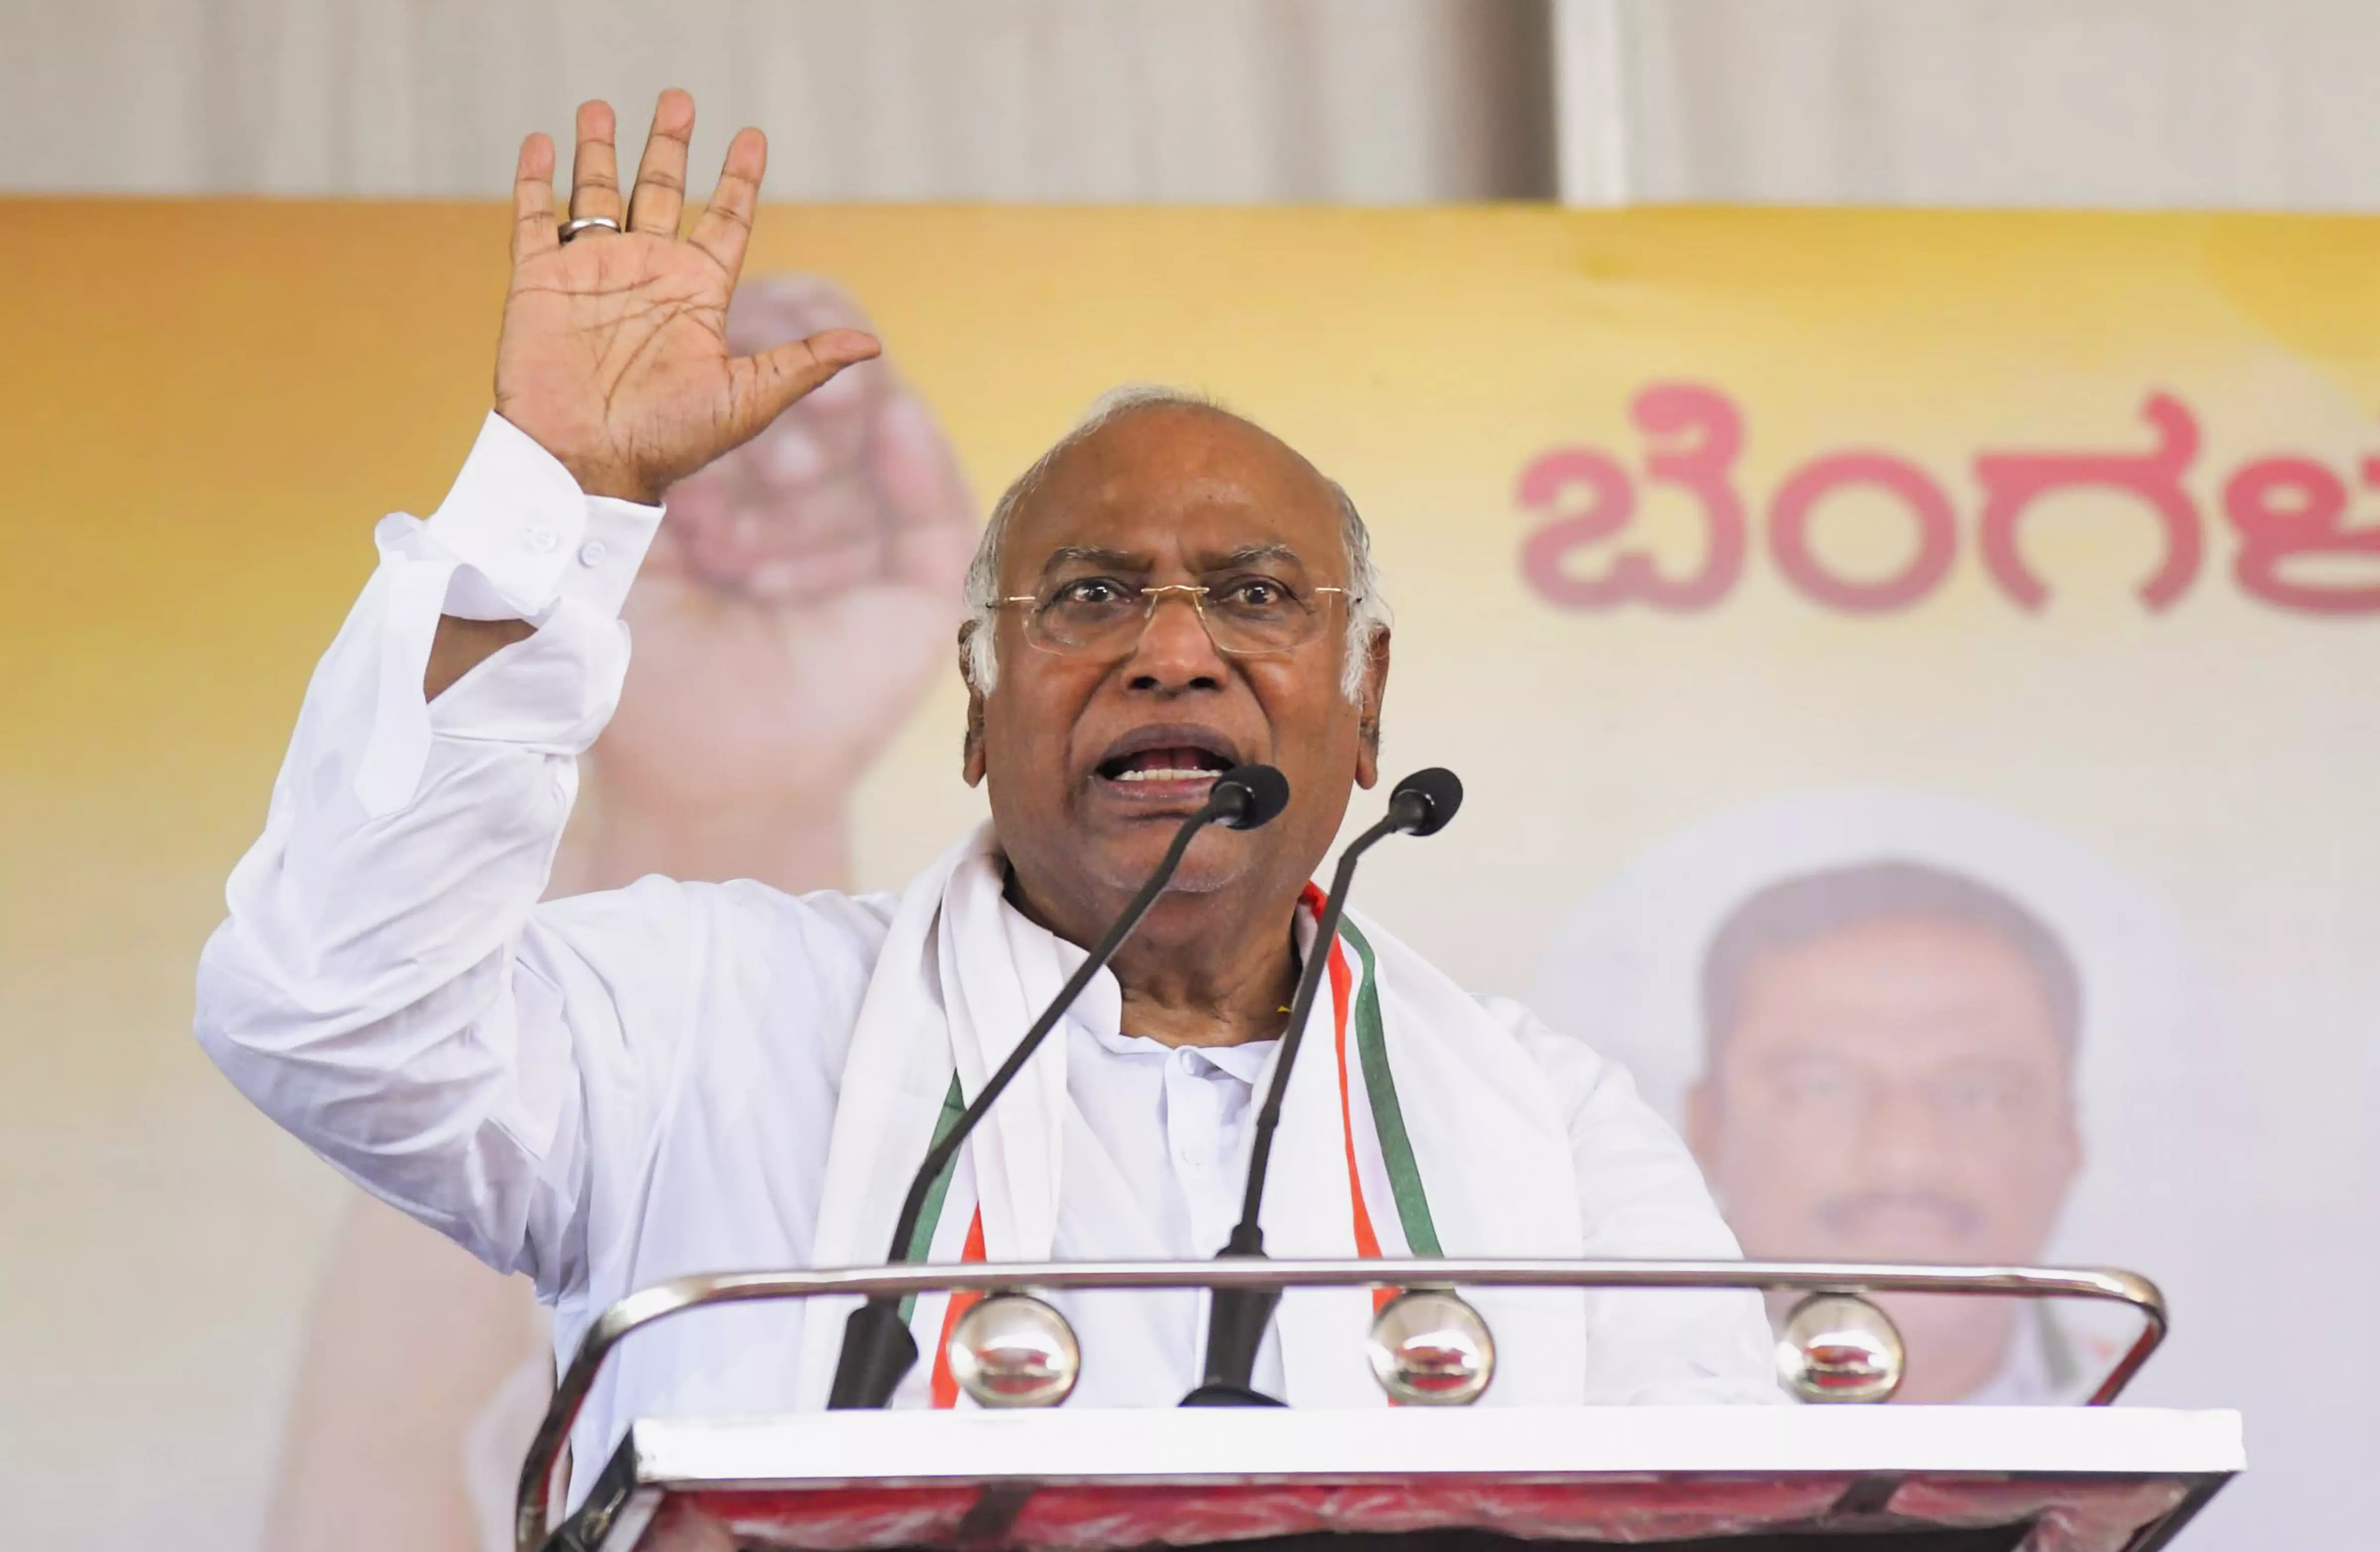 Kharge alleges link between Modi’s ‘400 paar’ call and aim to change Constitution